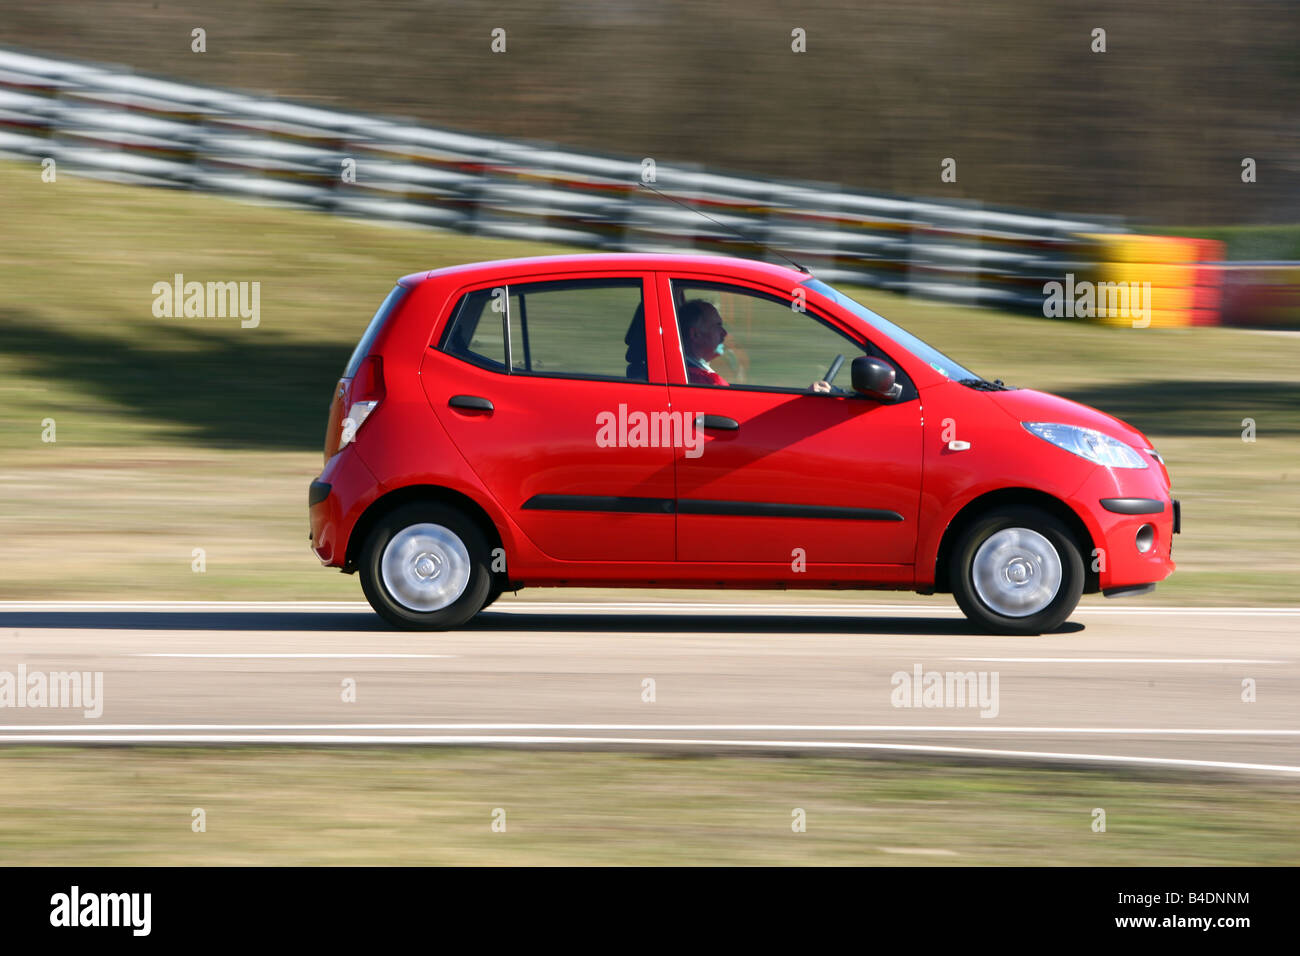 Hyandai i10 1.1 Classic E, model year 2008-, red, driving, side view, test track Stock Photo